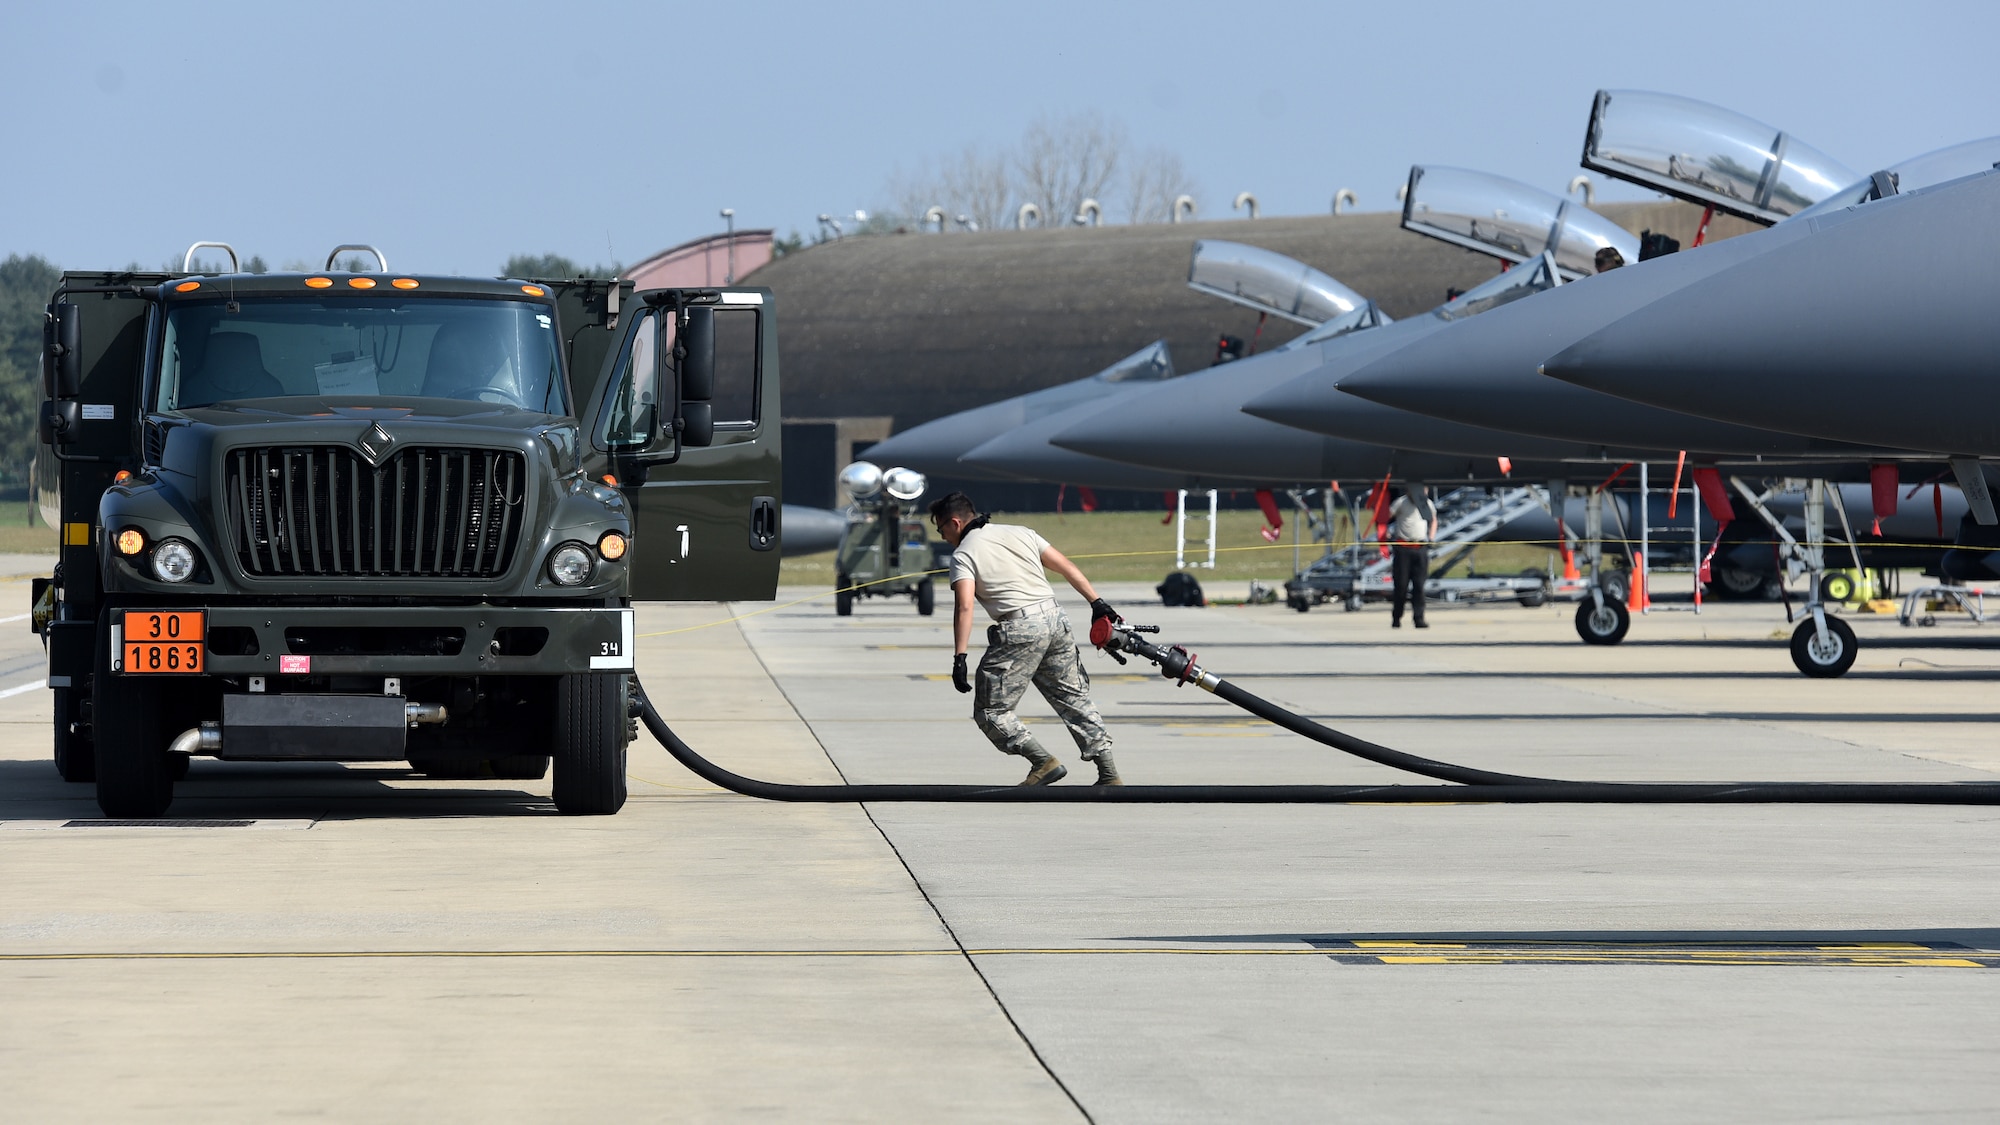 A Liberty Wing Airman finishes refueling an F-15E Strike Eagle at Royal Air Force Lakenheath, England, April 16, 2020. Despite the current COVID-19 crisis, the 48th Fighter Wing has a commitment to be ready to deliver combat air power when called upon by U.S. Air Forces in Europe-Air Forces Africa. (U.S. Air Force photo by Airman 1st Class Jessi Monte)